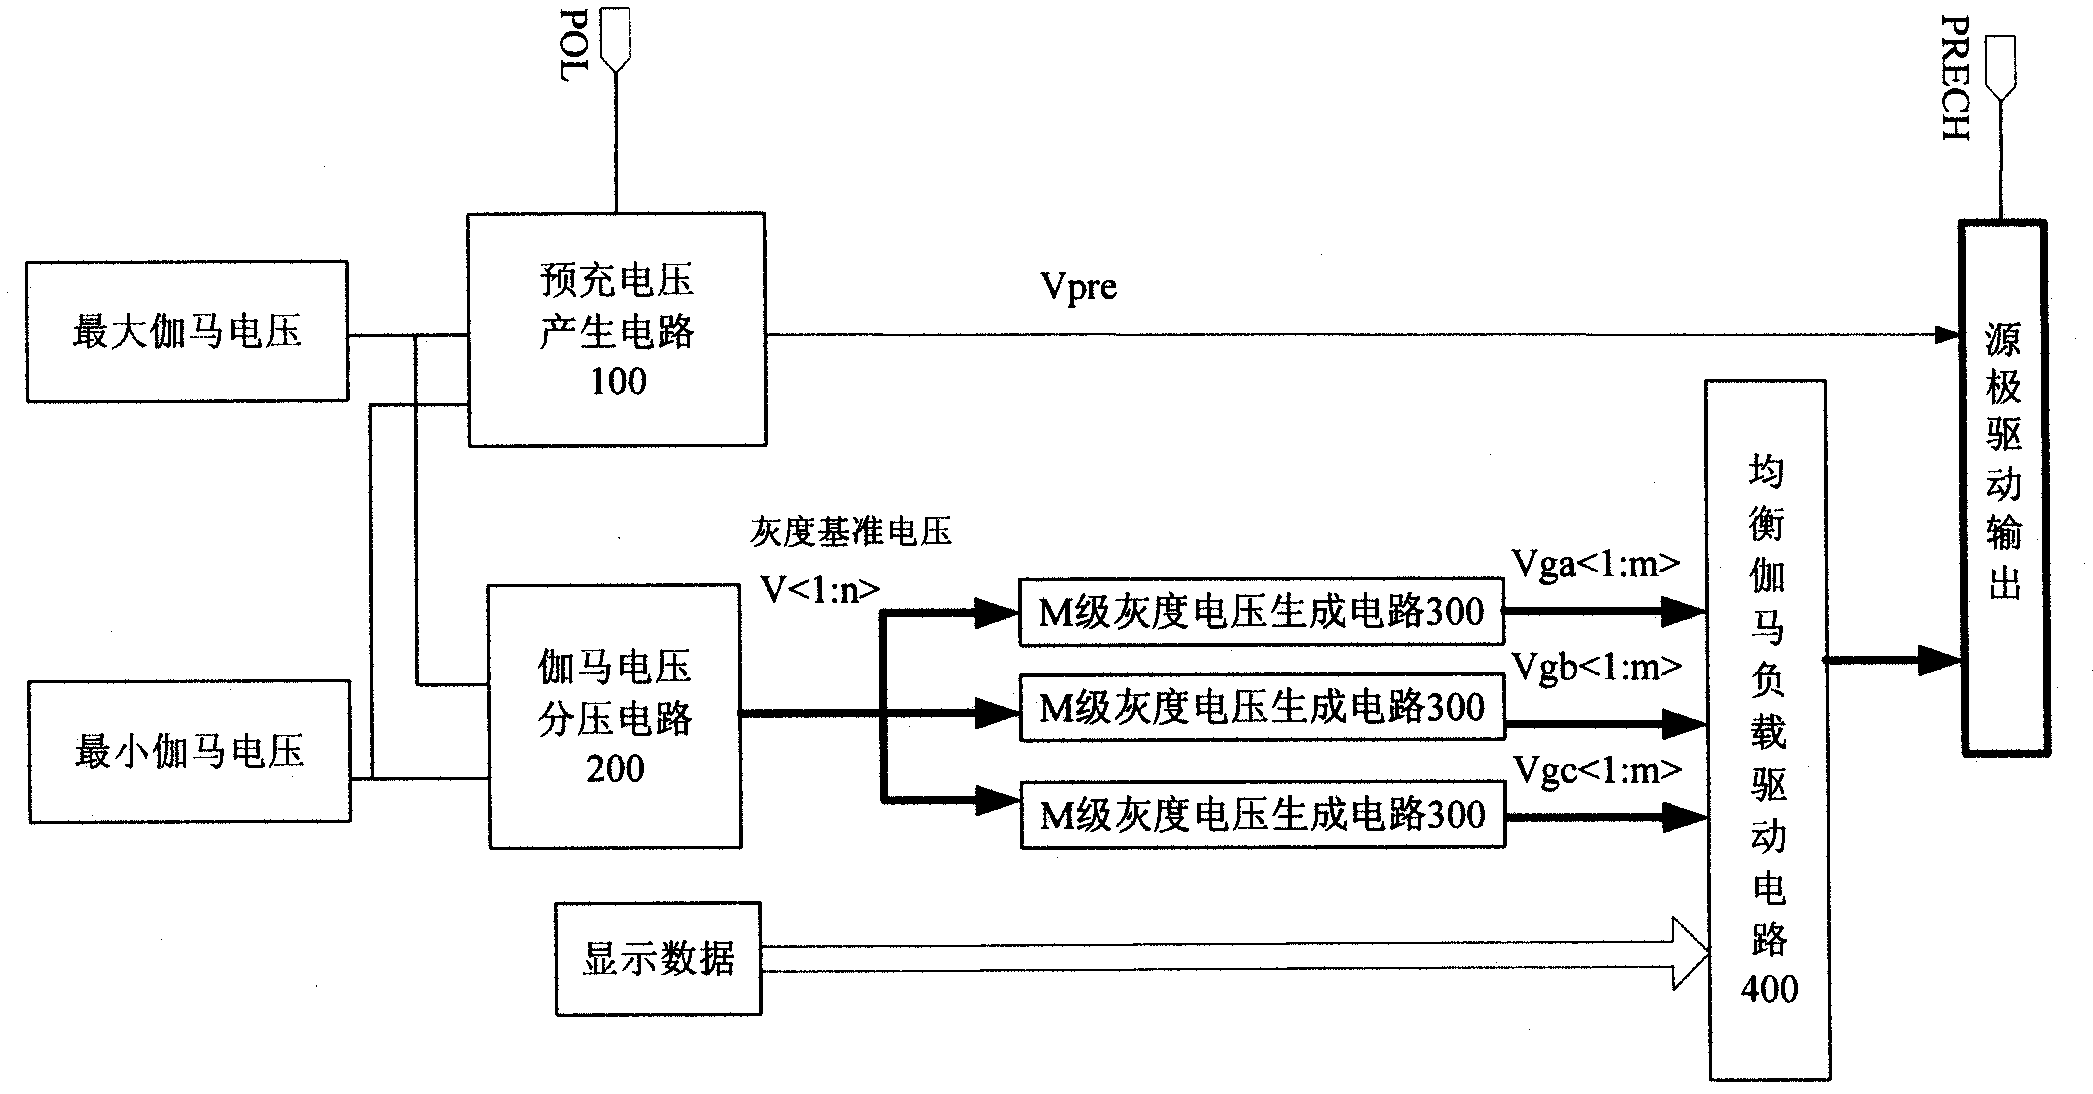 Method for implementing liquid crystal display drive circuit and source pole drive circuit module